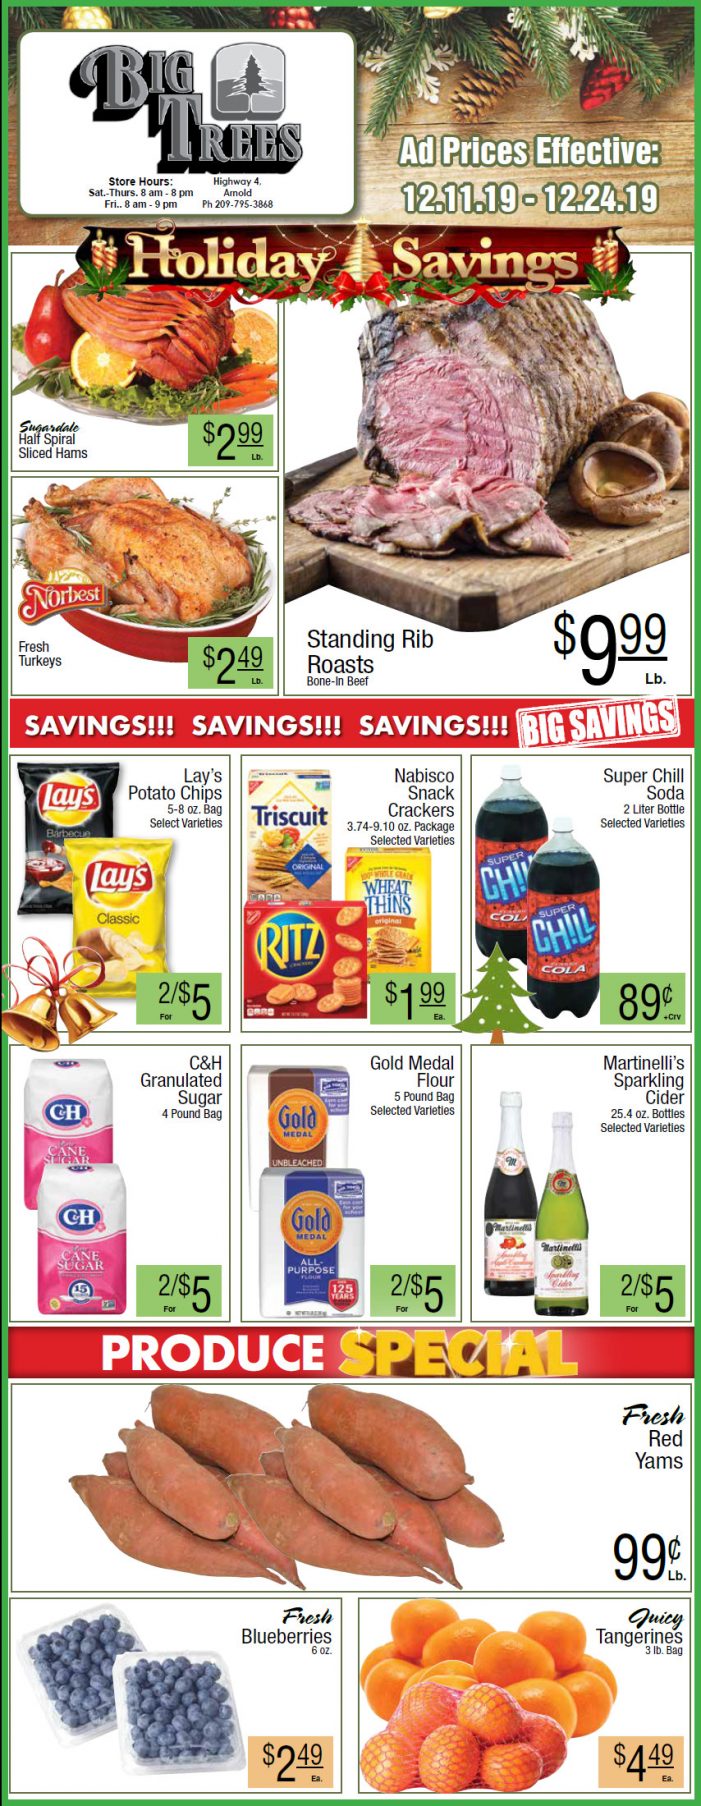 Big Trees Market Weekly Ad & Grocery Specials Through December 24th!